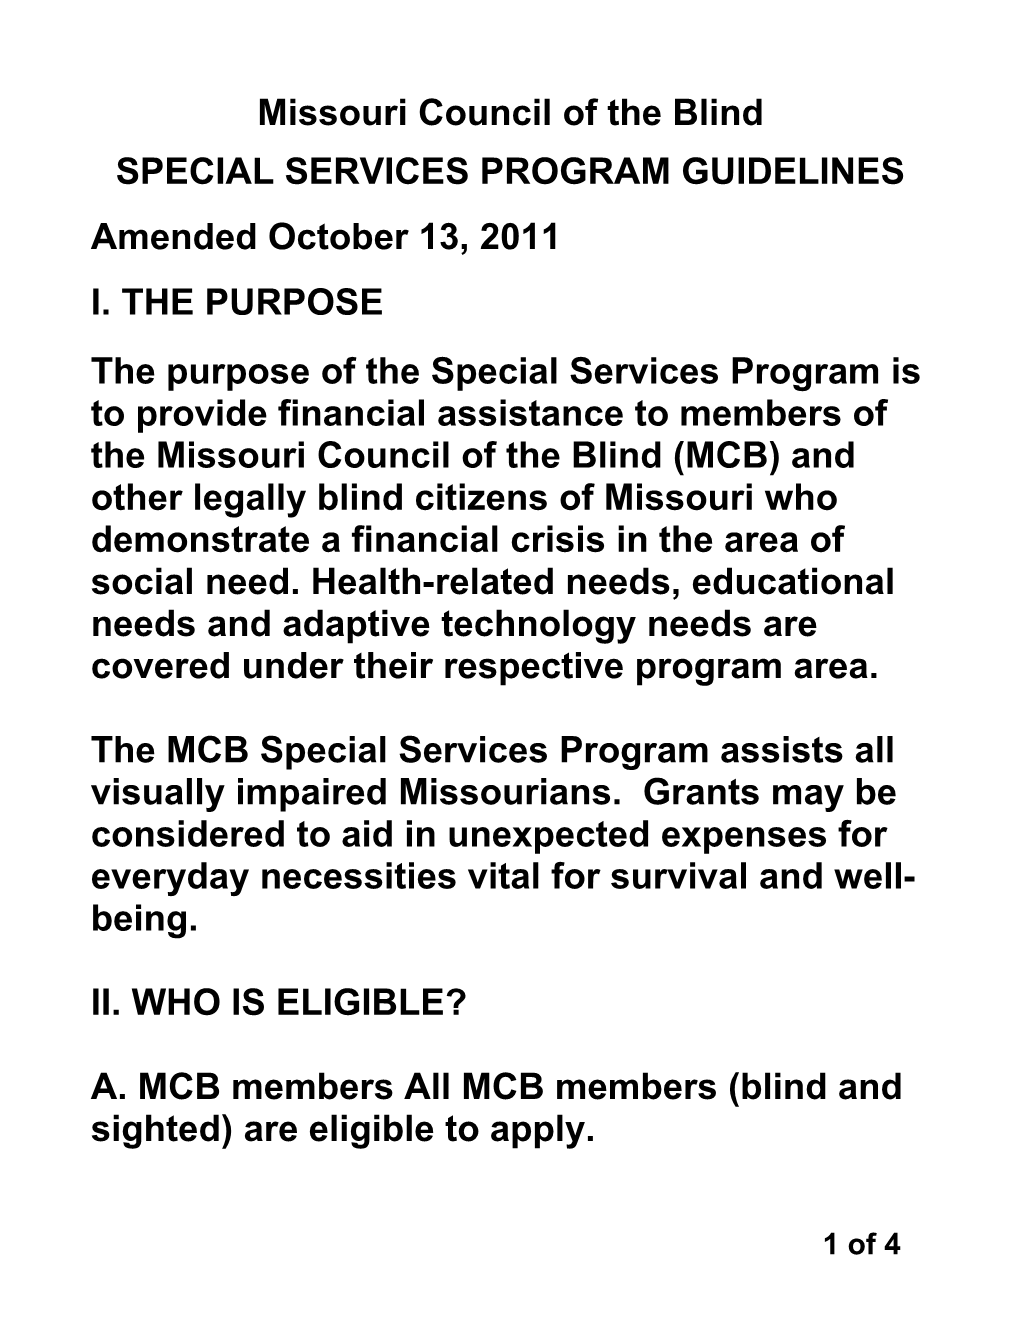 Missouri Council of the Blind Special Services Program Guidelines